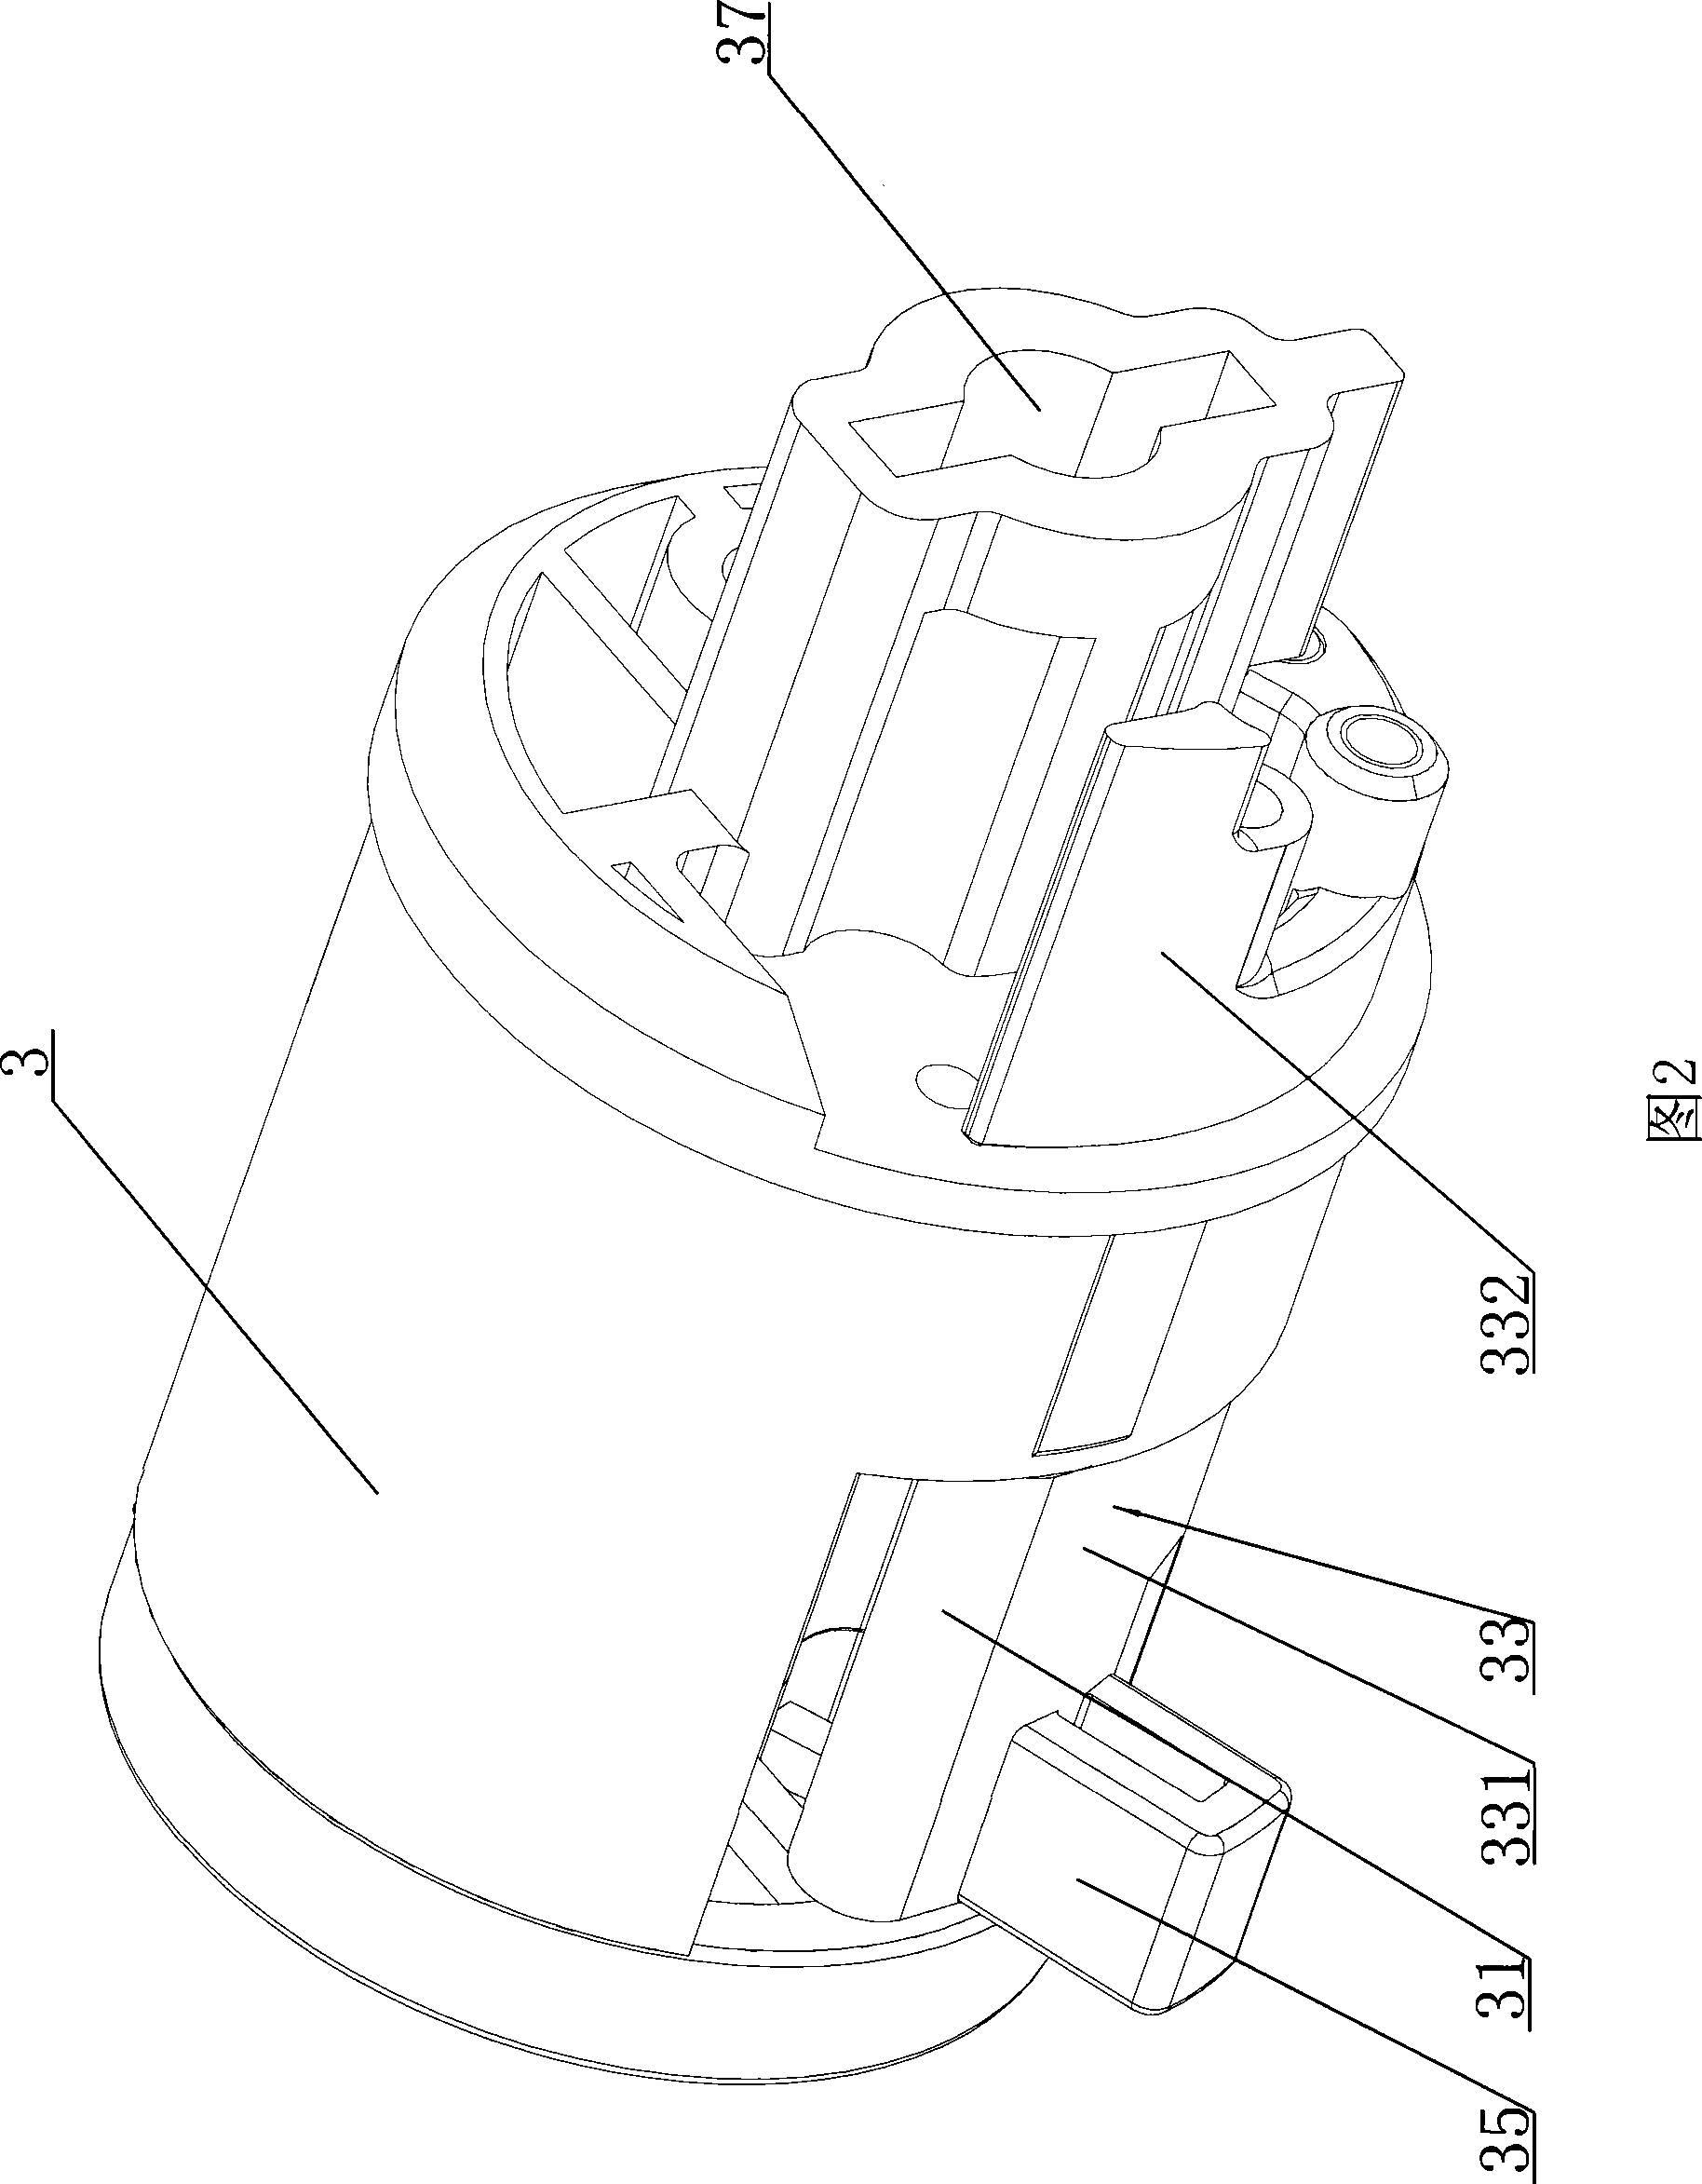 Electric coiling spacing detection device